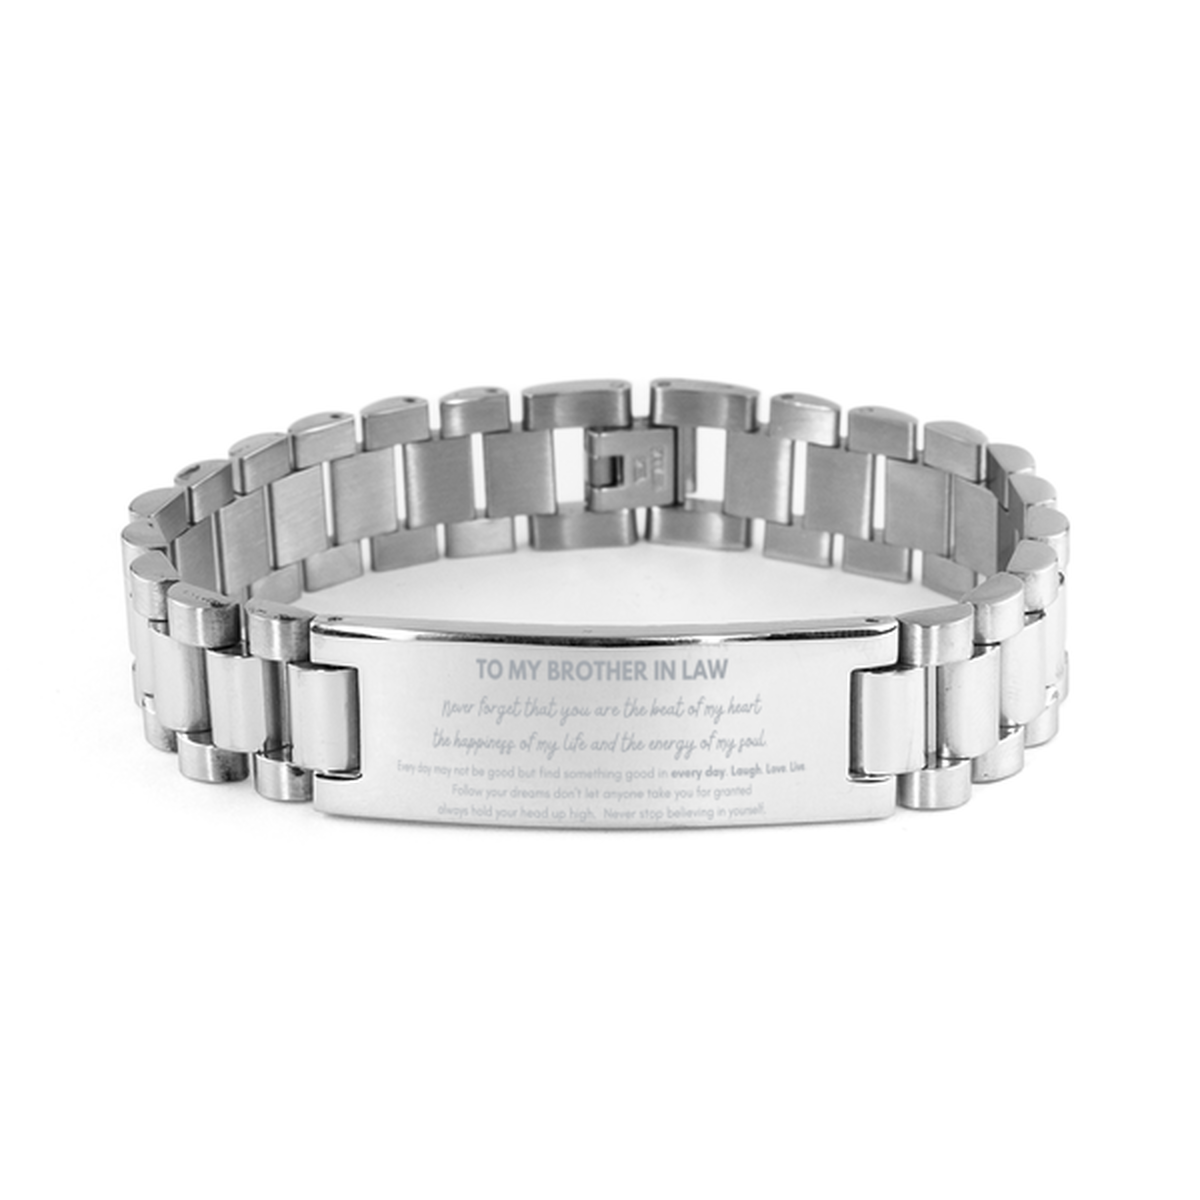 To My Brother In Law Bracelet Gifts, Christmas Brother In Law Ladder Stainless Steel Bracelet Present, Birthday Unique Motivational For Brother In Law, To My Brother In Law Never forget that you are the beat of my heart the happiness of my life and the en